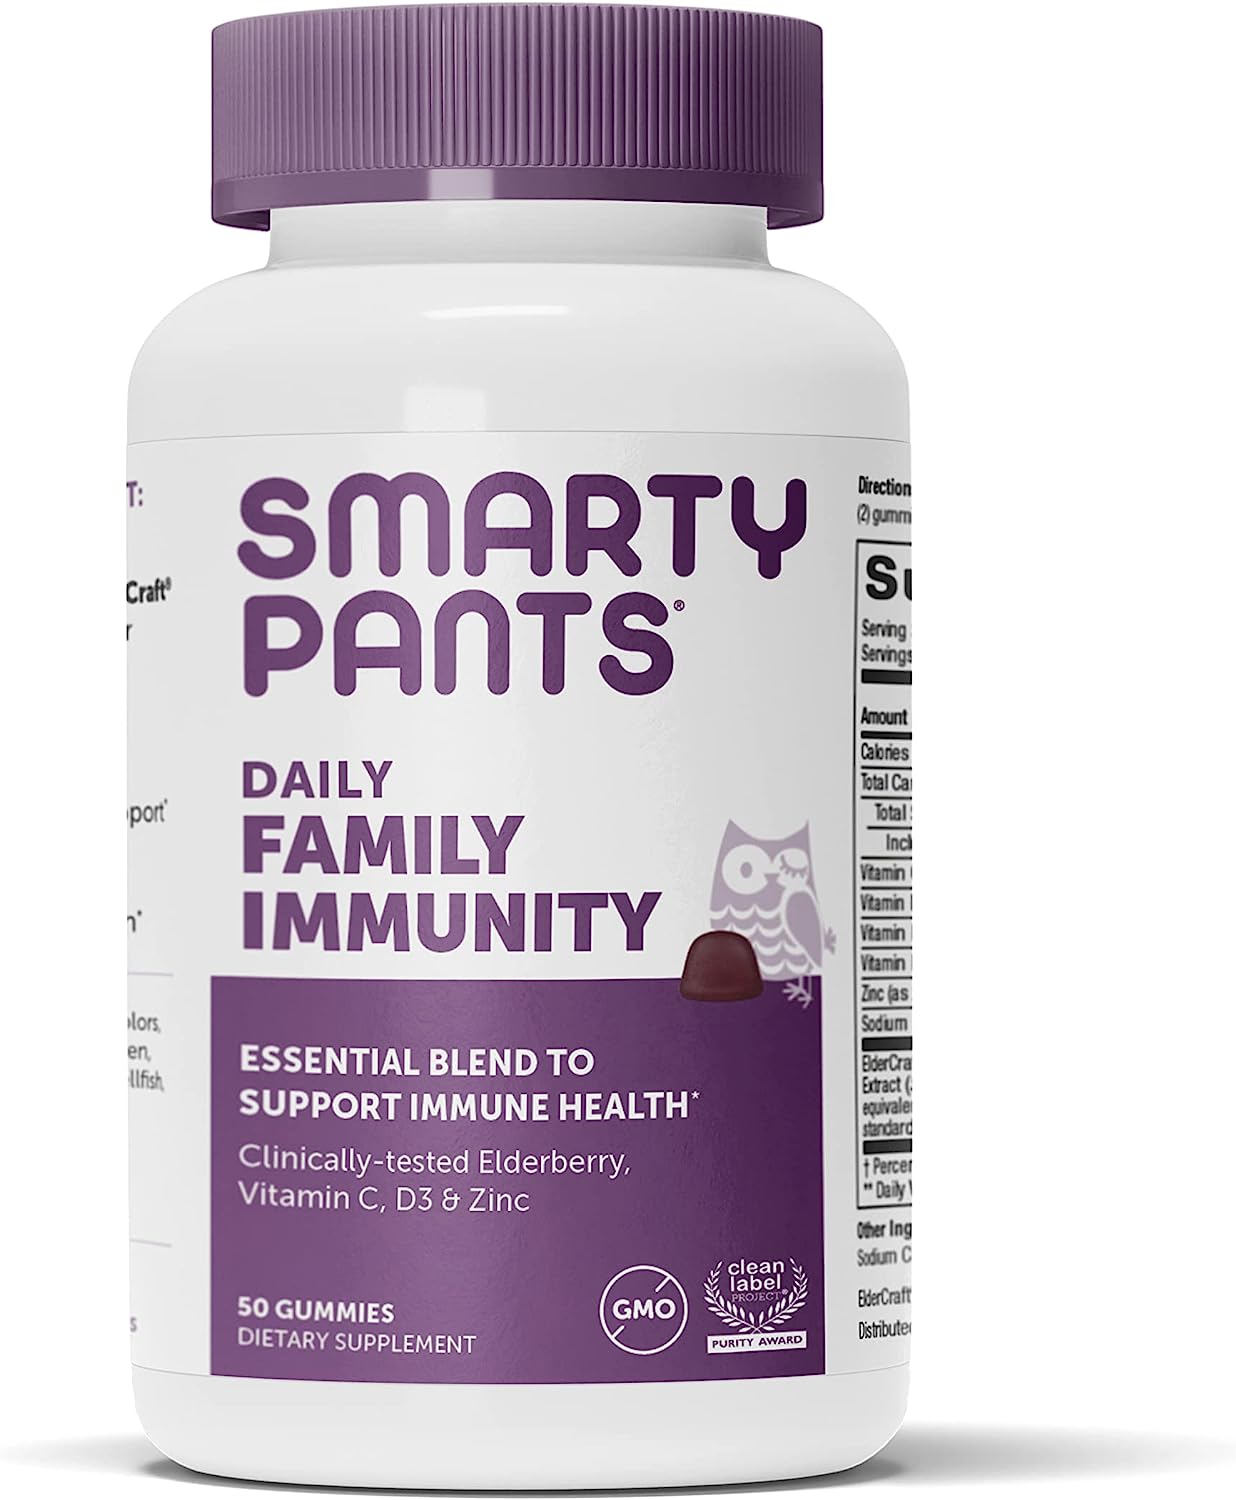 SmartyPants Immune Support Supplement: Clinically Tested Elderberry Gummies for Adults and Kids, Vitamin C, Vitamin D3,